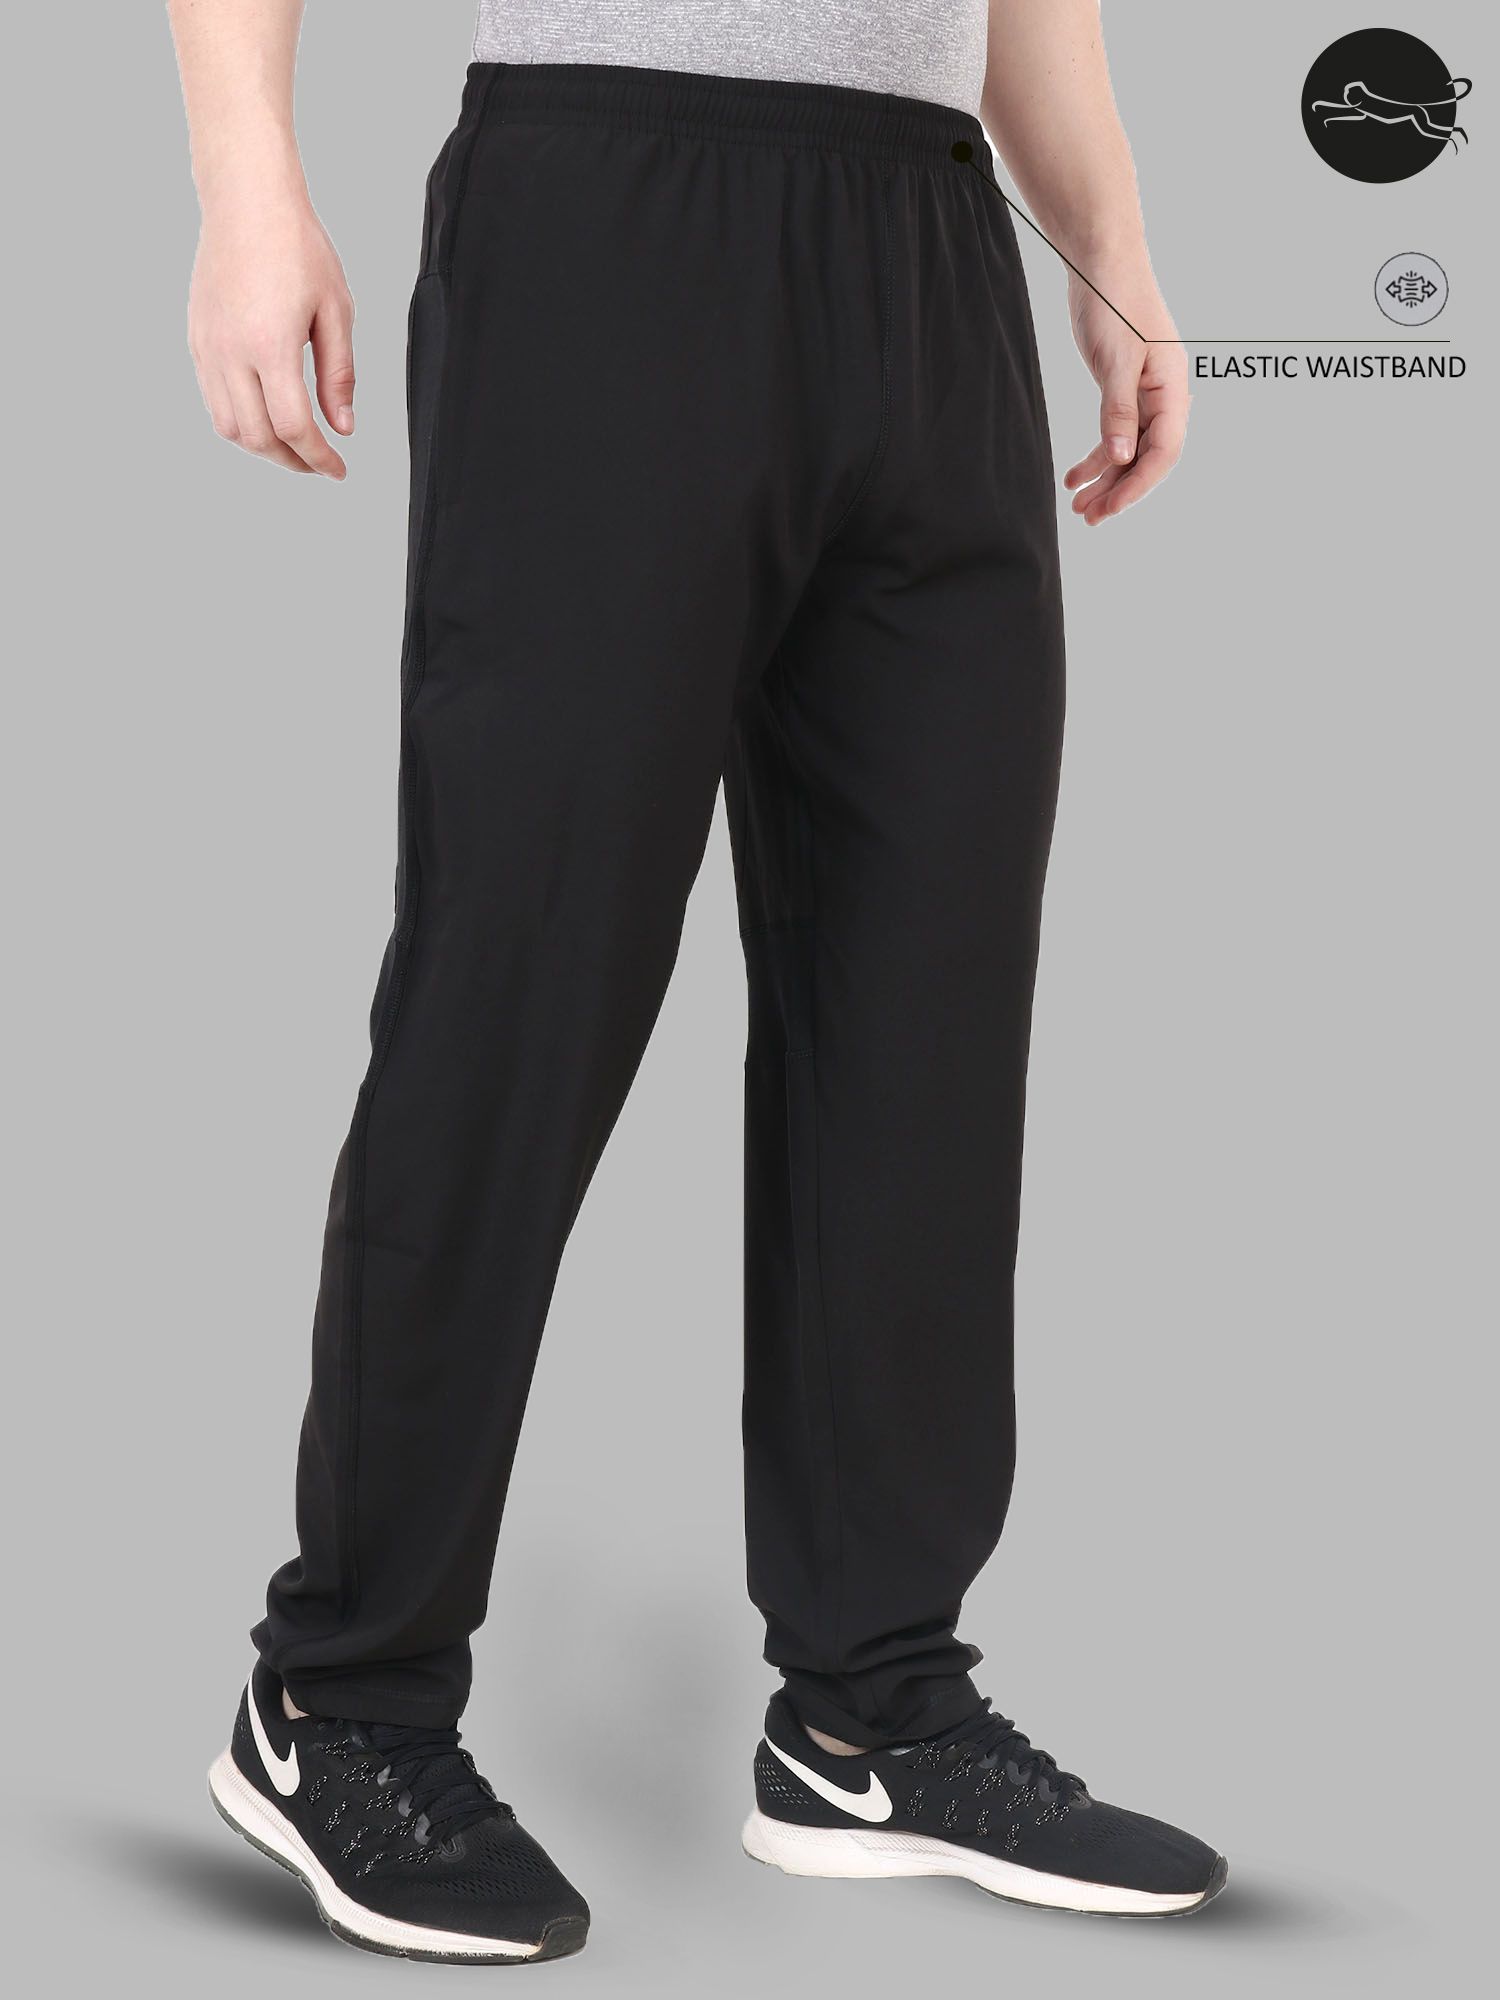 Black Polyester Straight Fit Trackpant by FITMonkey - Buy Black ...